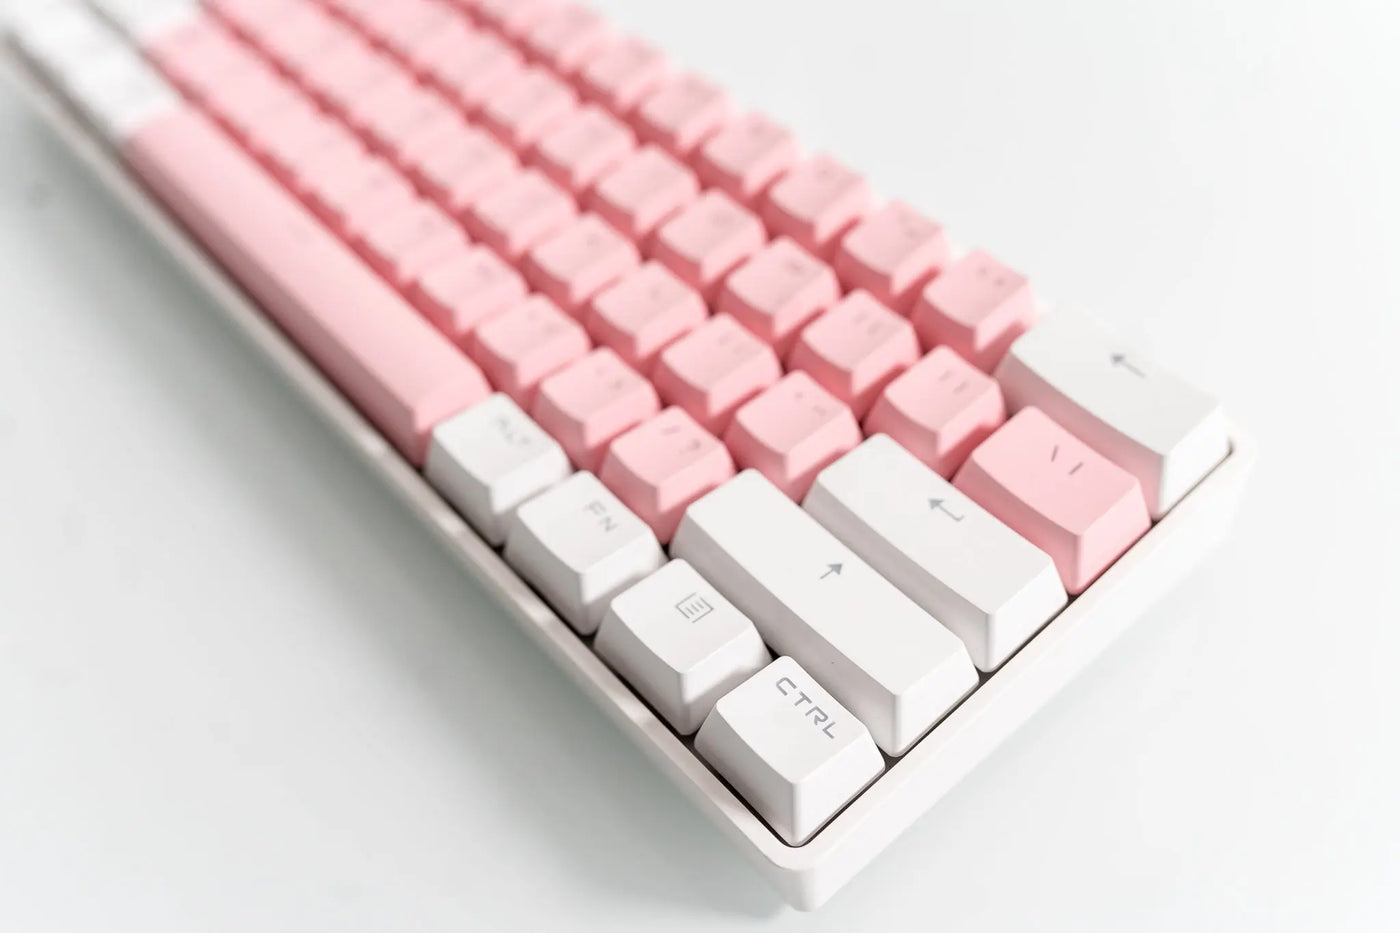 VK61 - Pink and White Vyral